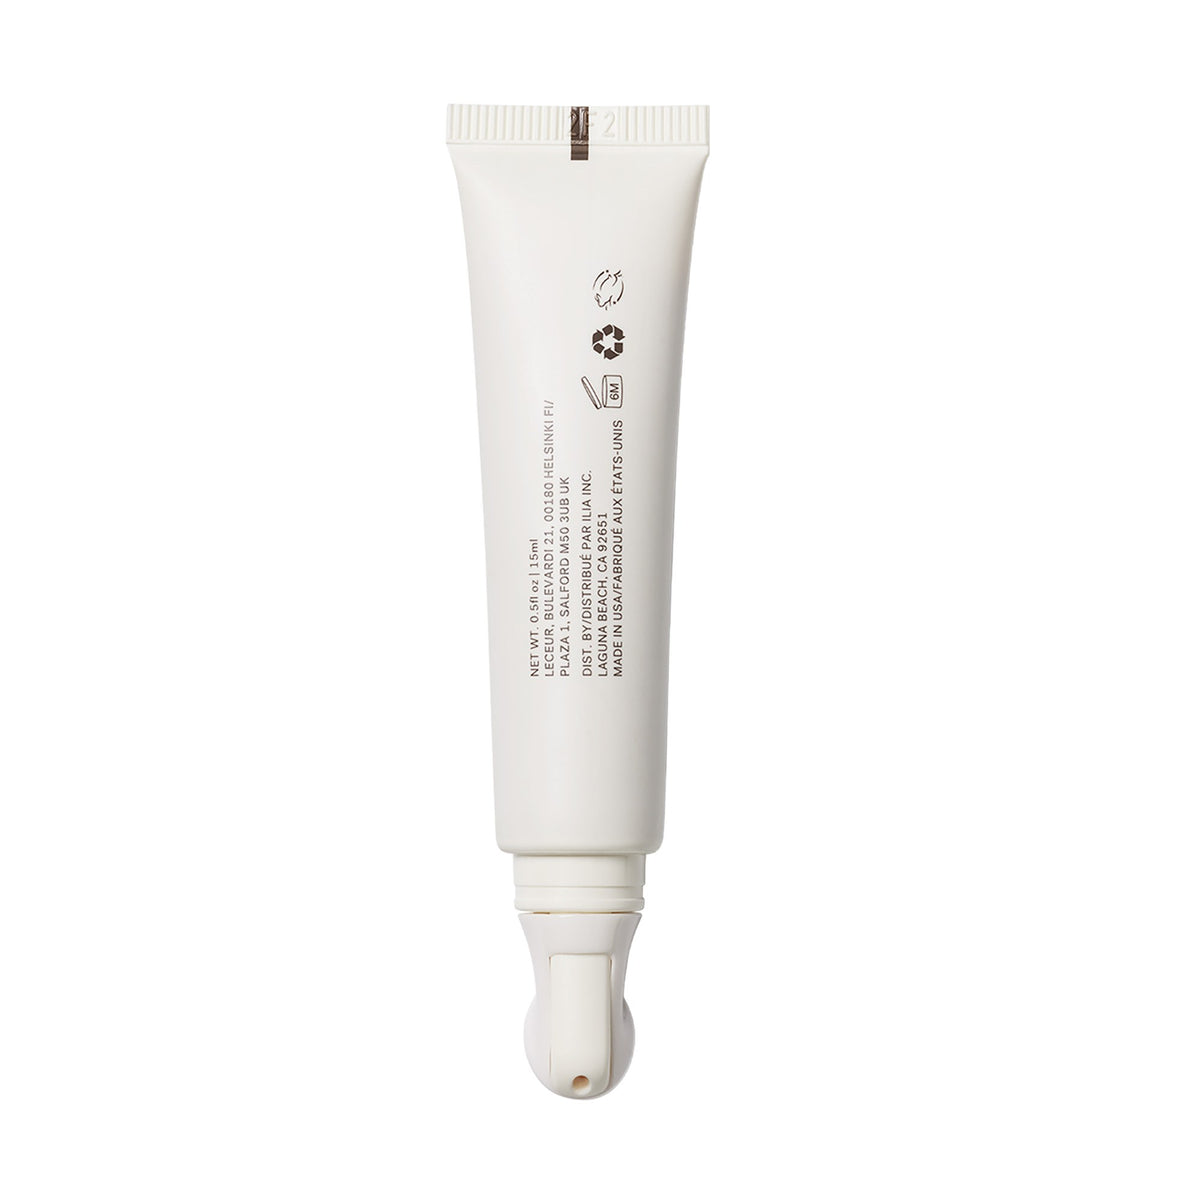 Primary image of Bright Start Activated Eye Cream Back